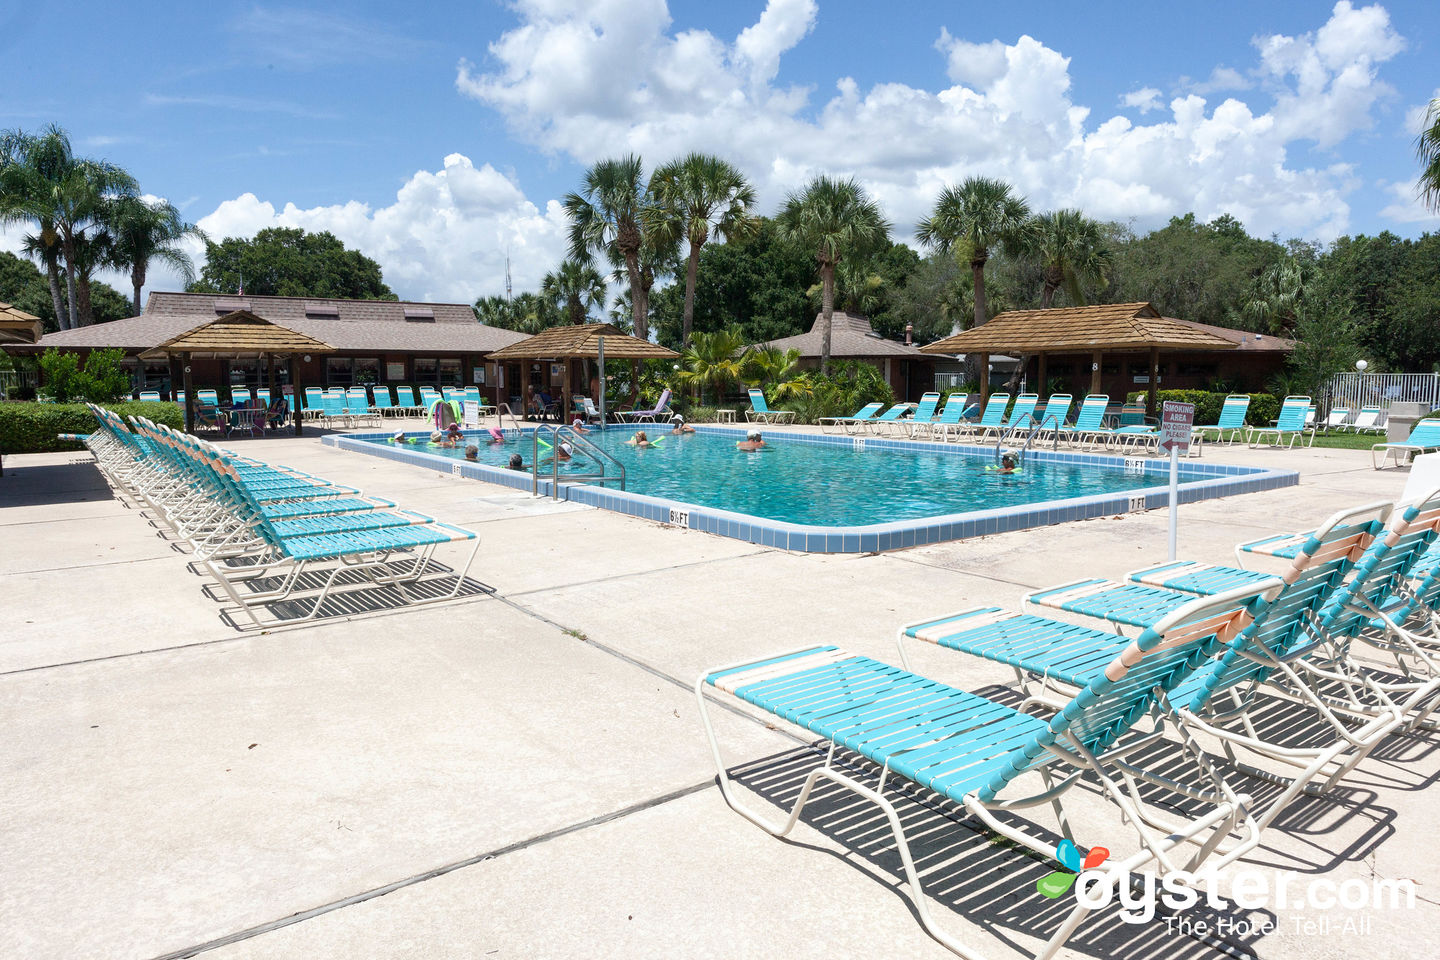 Nudist Camp Free Videos - Cypress Cove Nudist Resort Review: What To REALLY Expect If You Stay